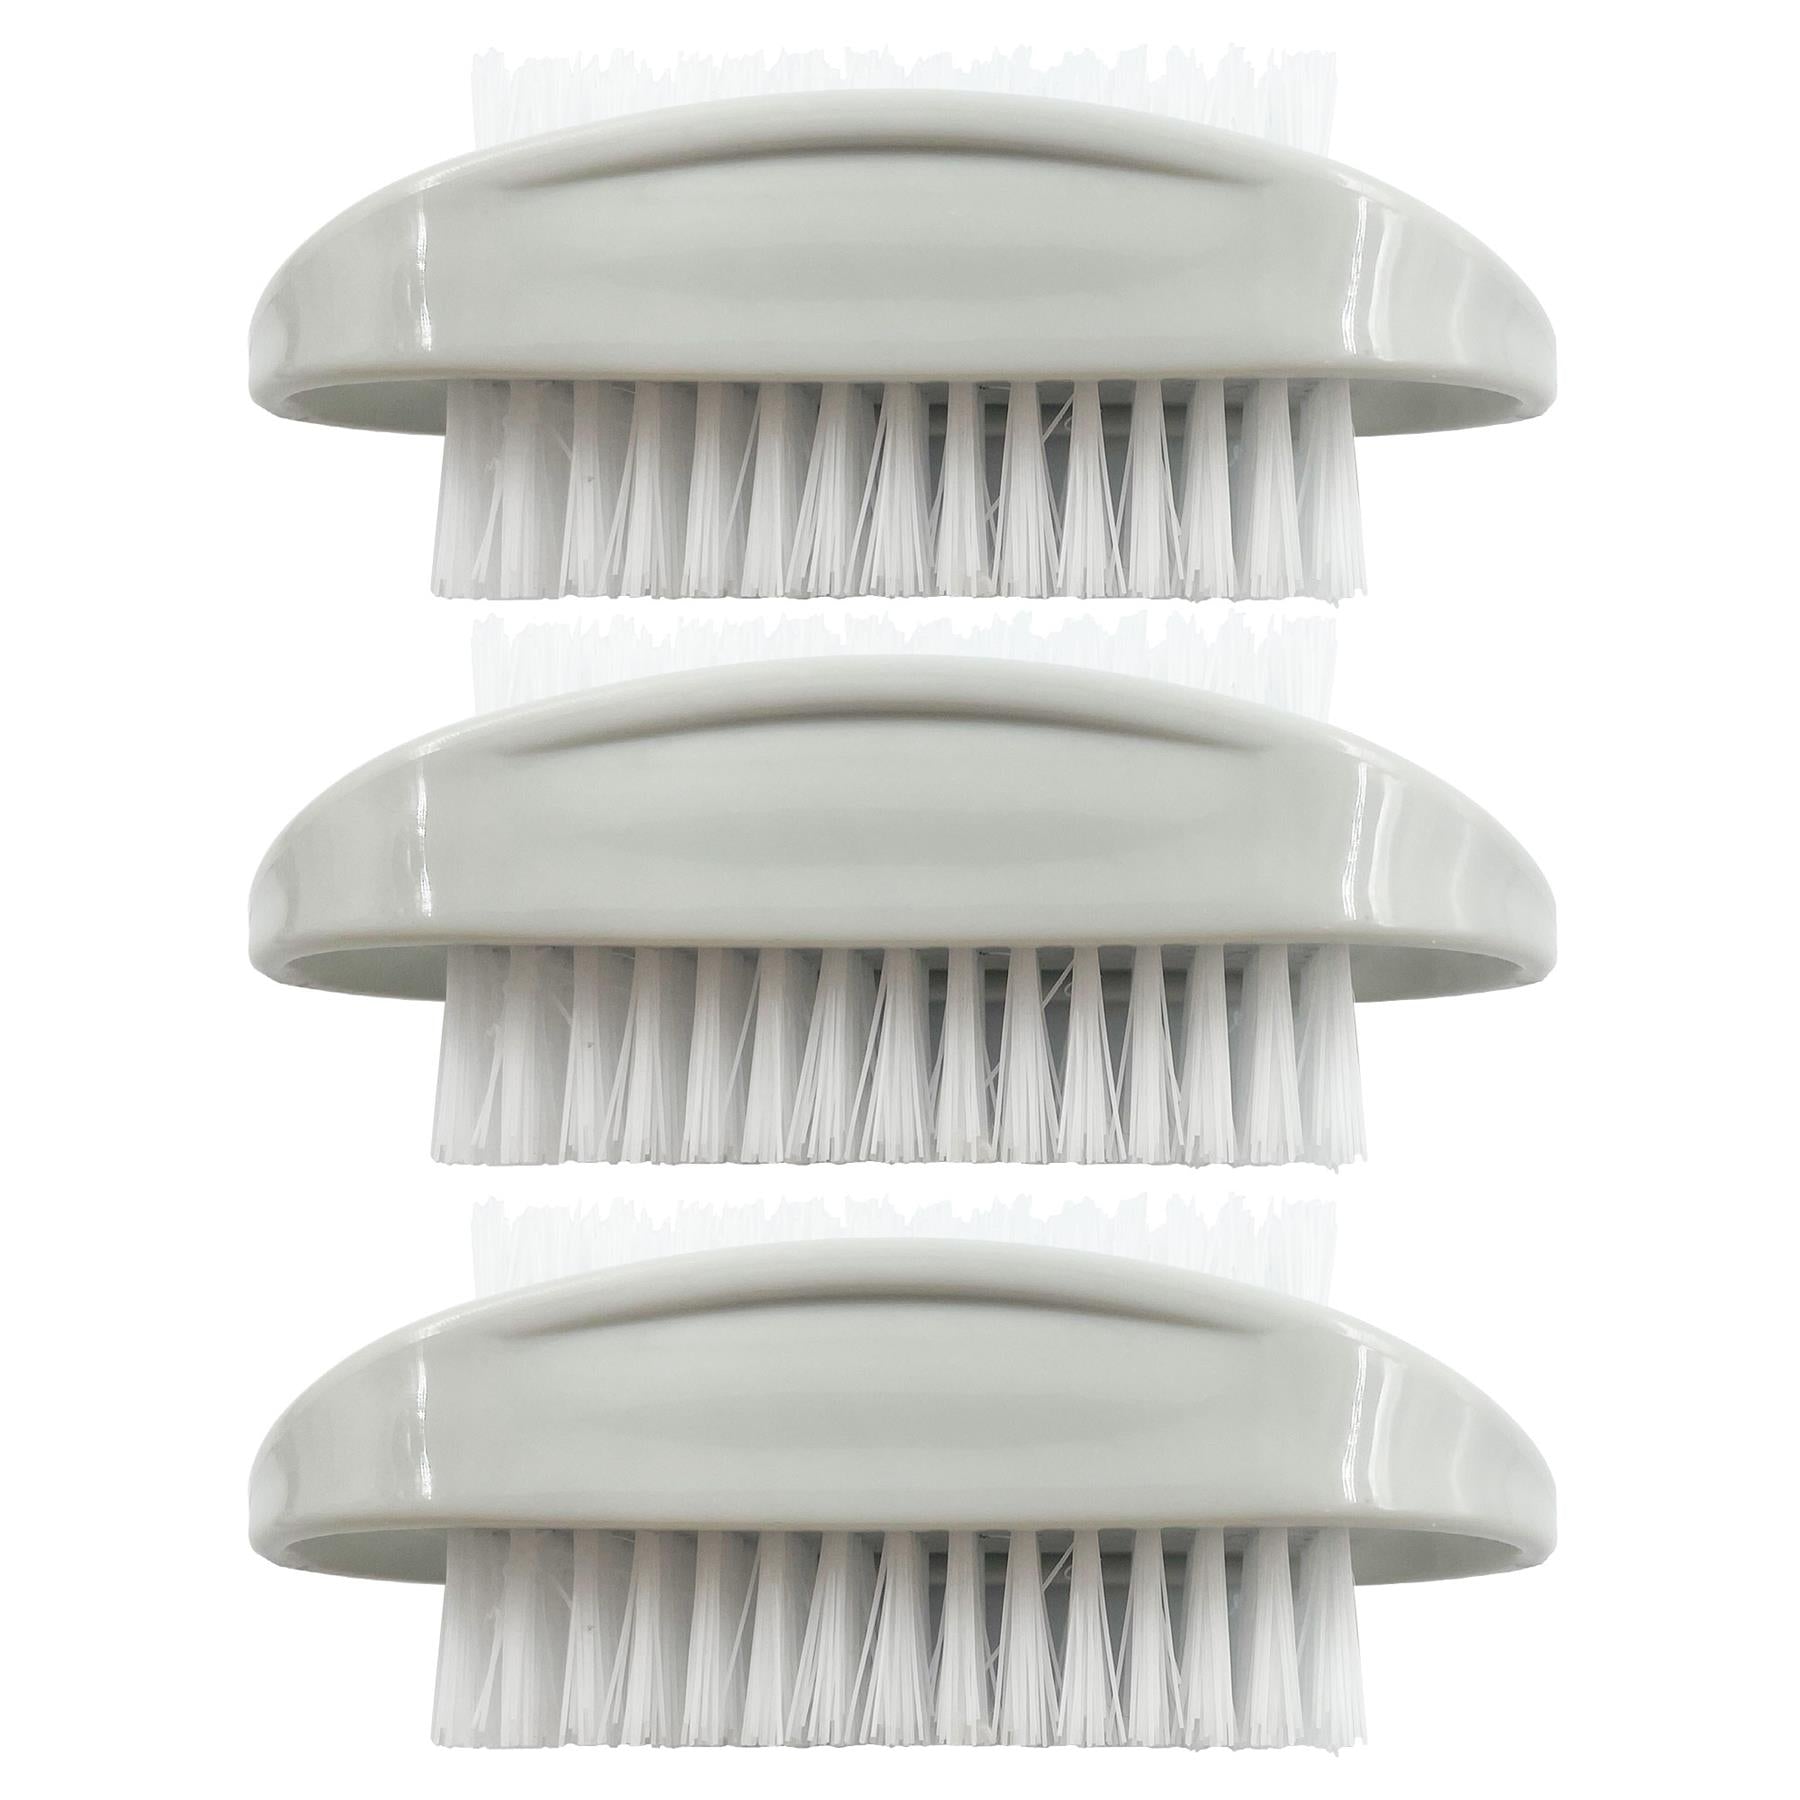 Silver Plastic Nail Brush - Pack of 3